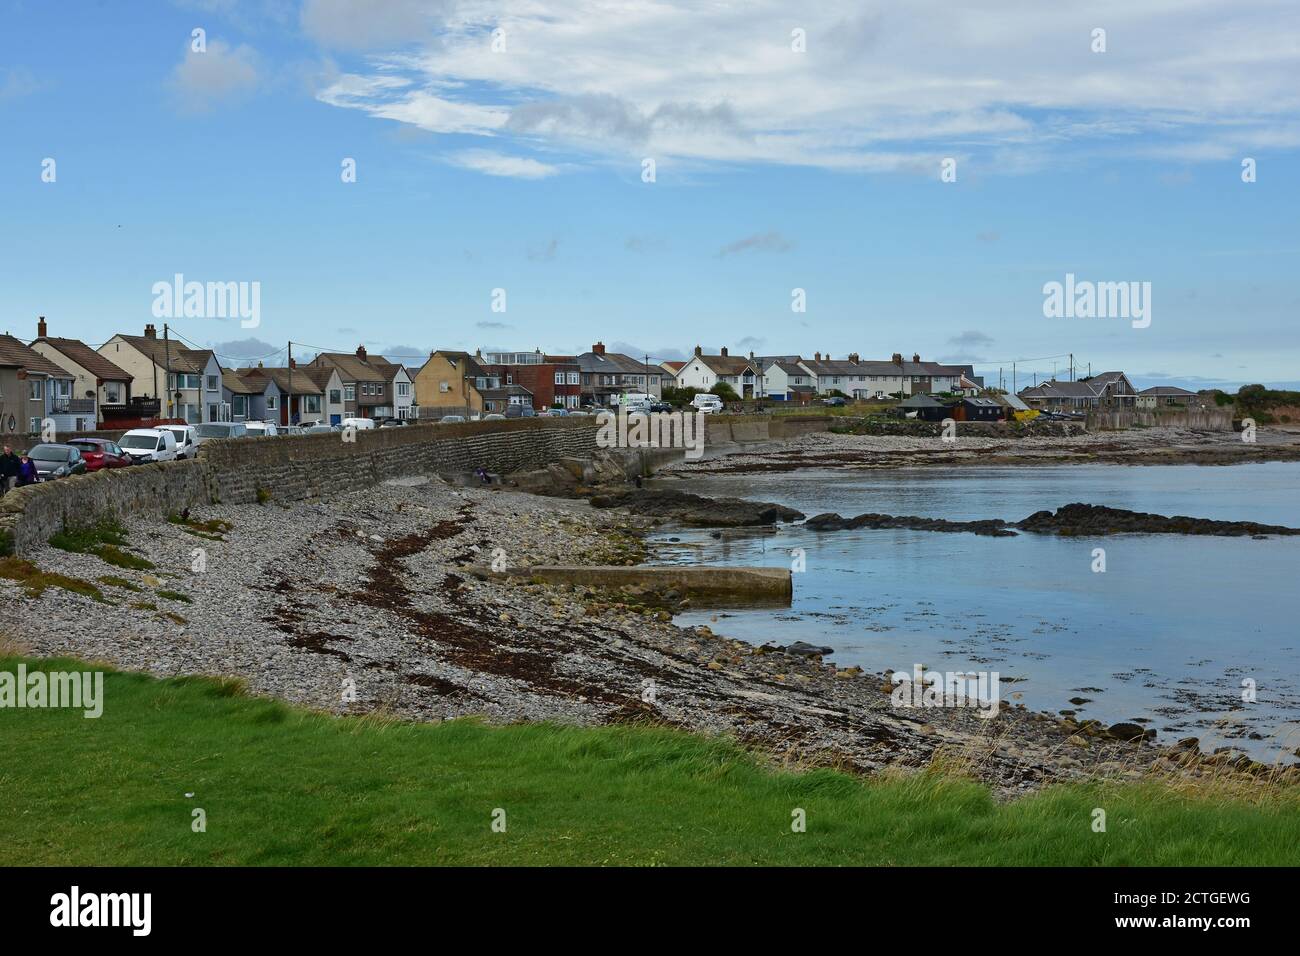 Houses on the bay, Beadnell, Northumberland Stock Photo